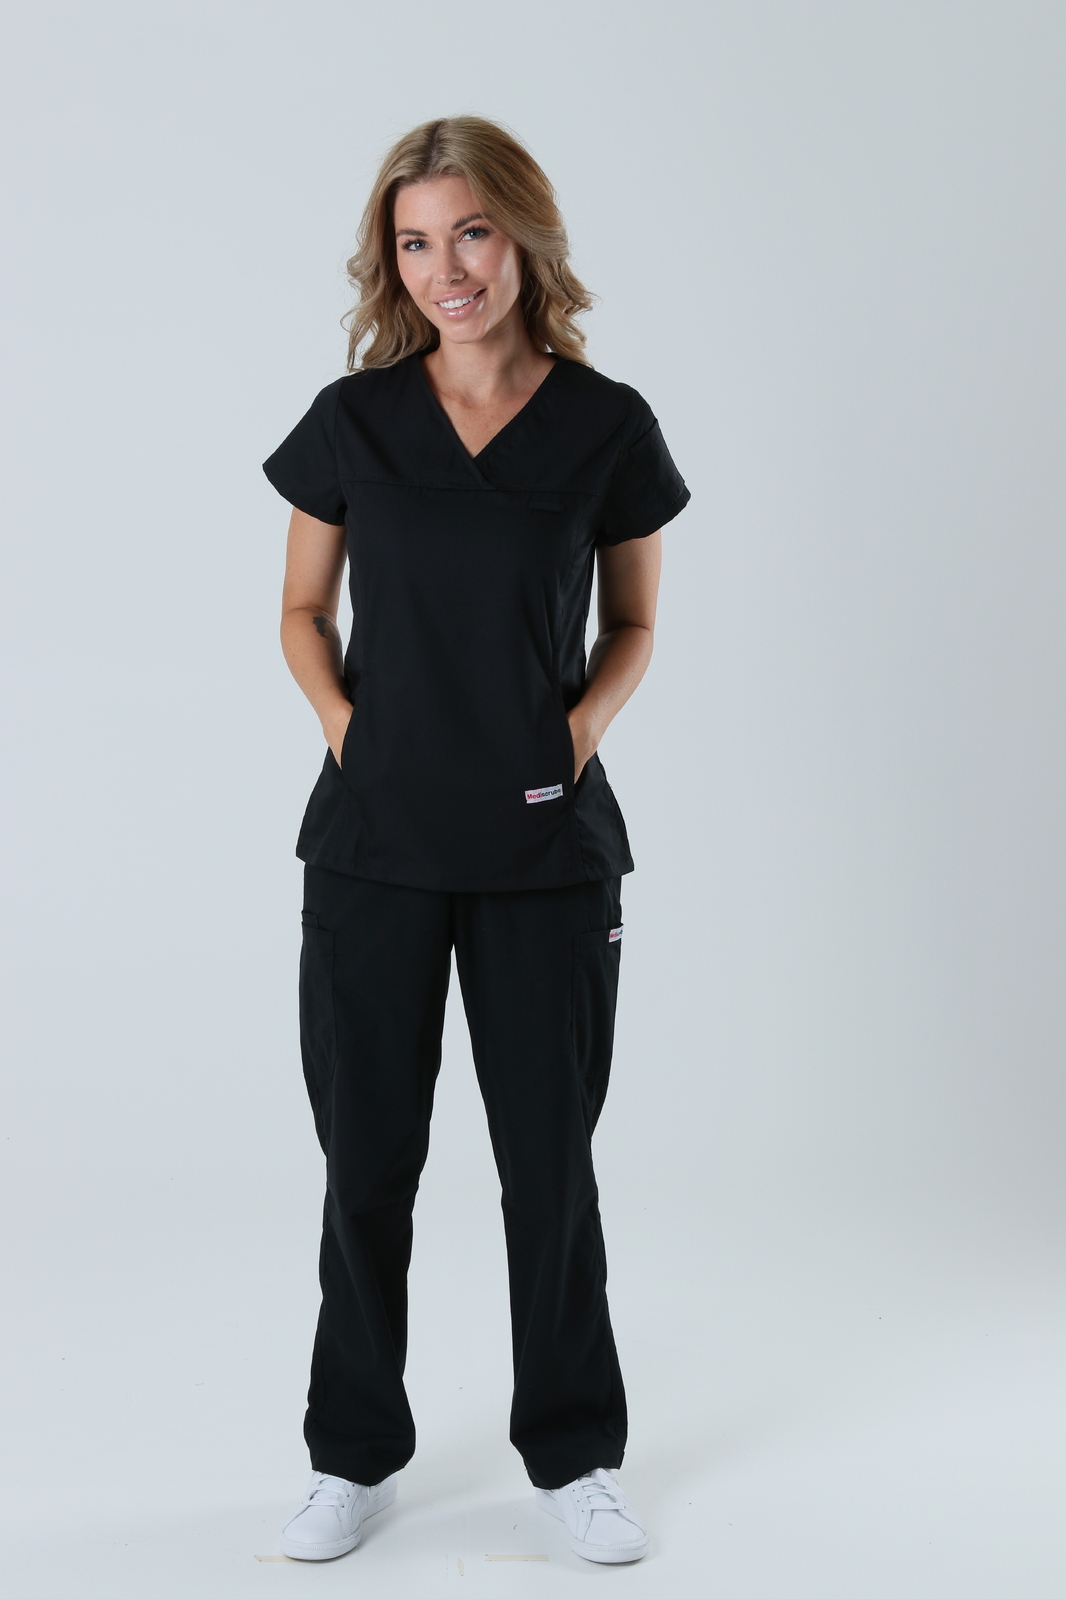 Ipswich Hospital - Senior Medical Officer (Women's Fit Solid Scrub Top and Cargo Pants in Black incl Logos)